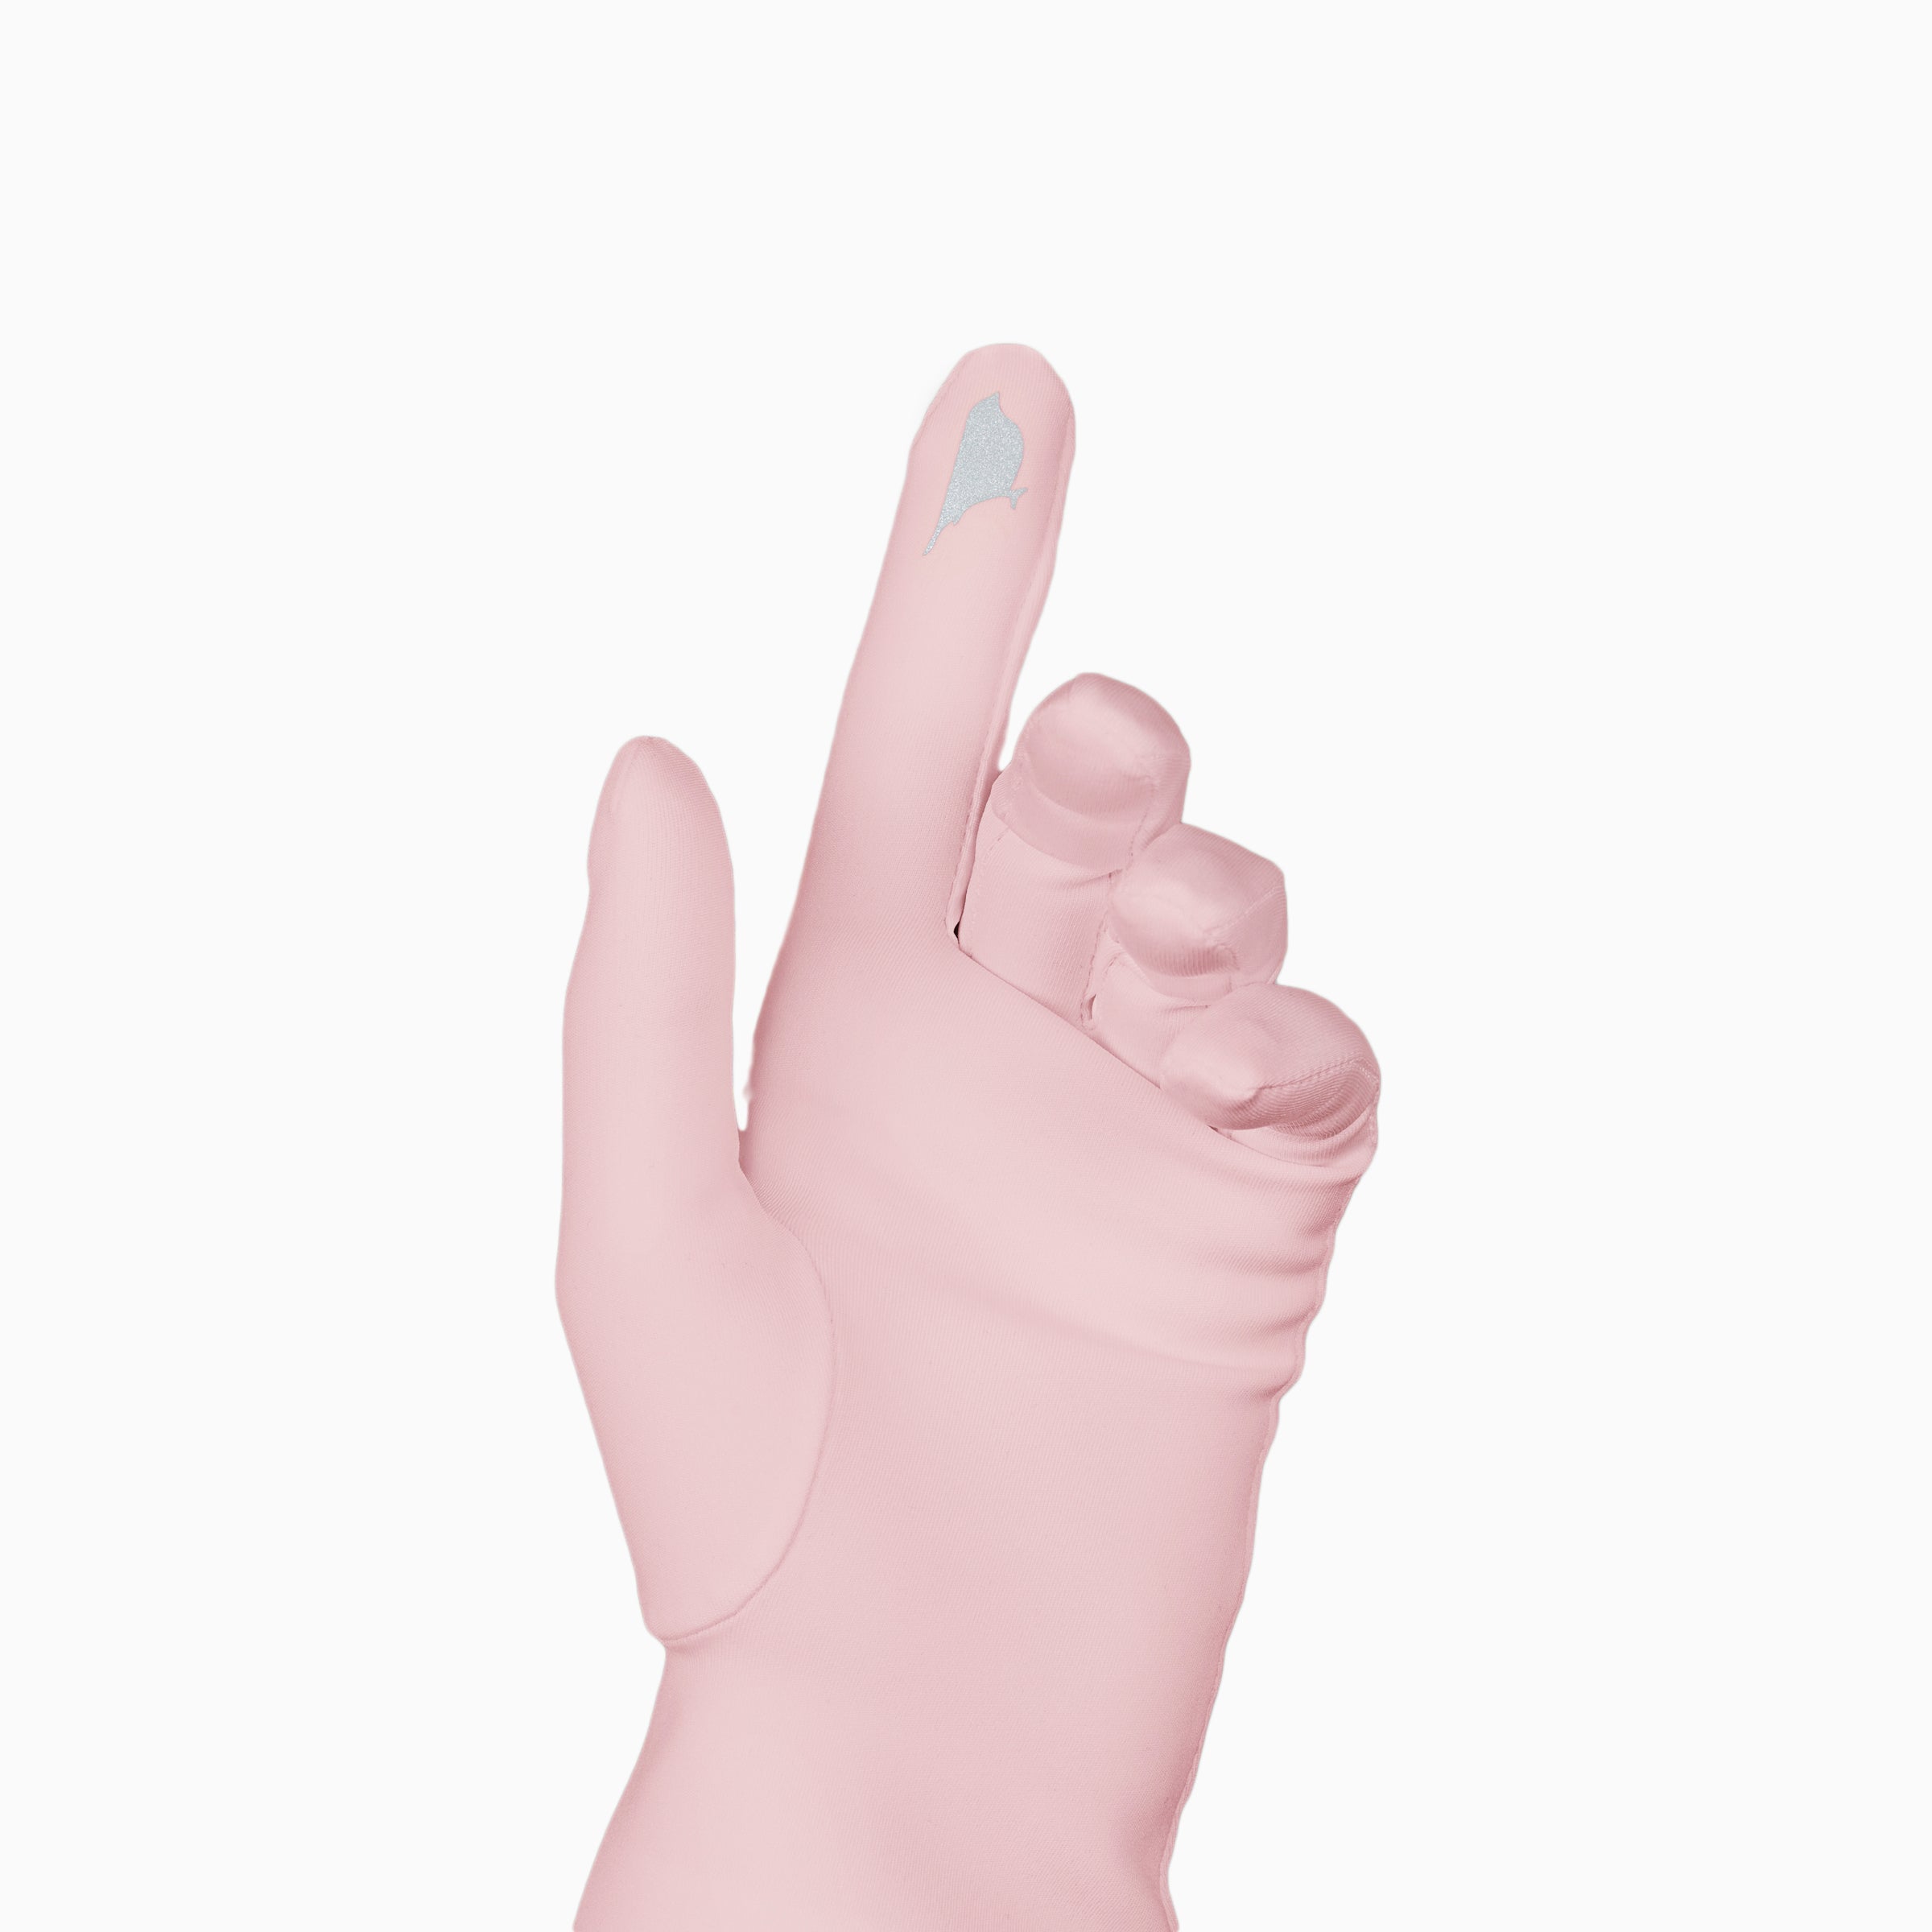 A pink glove with technology touchscreen index finger.